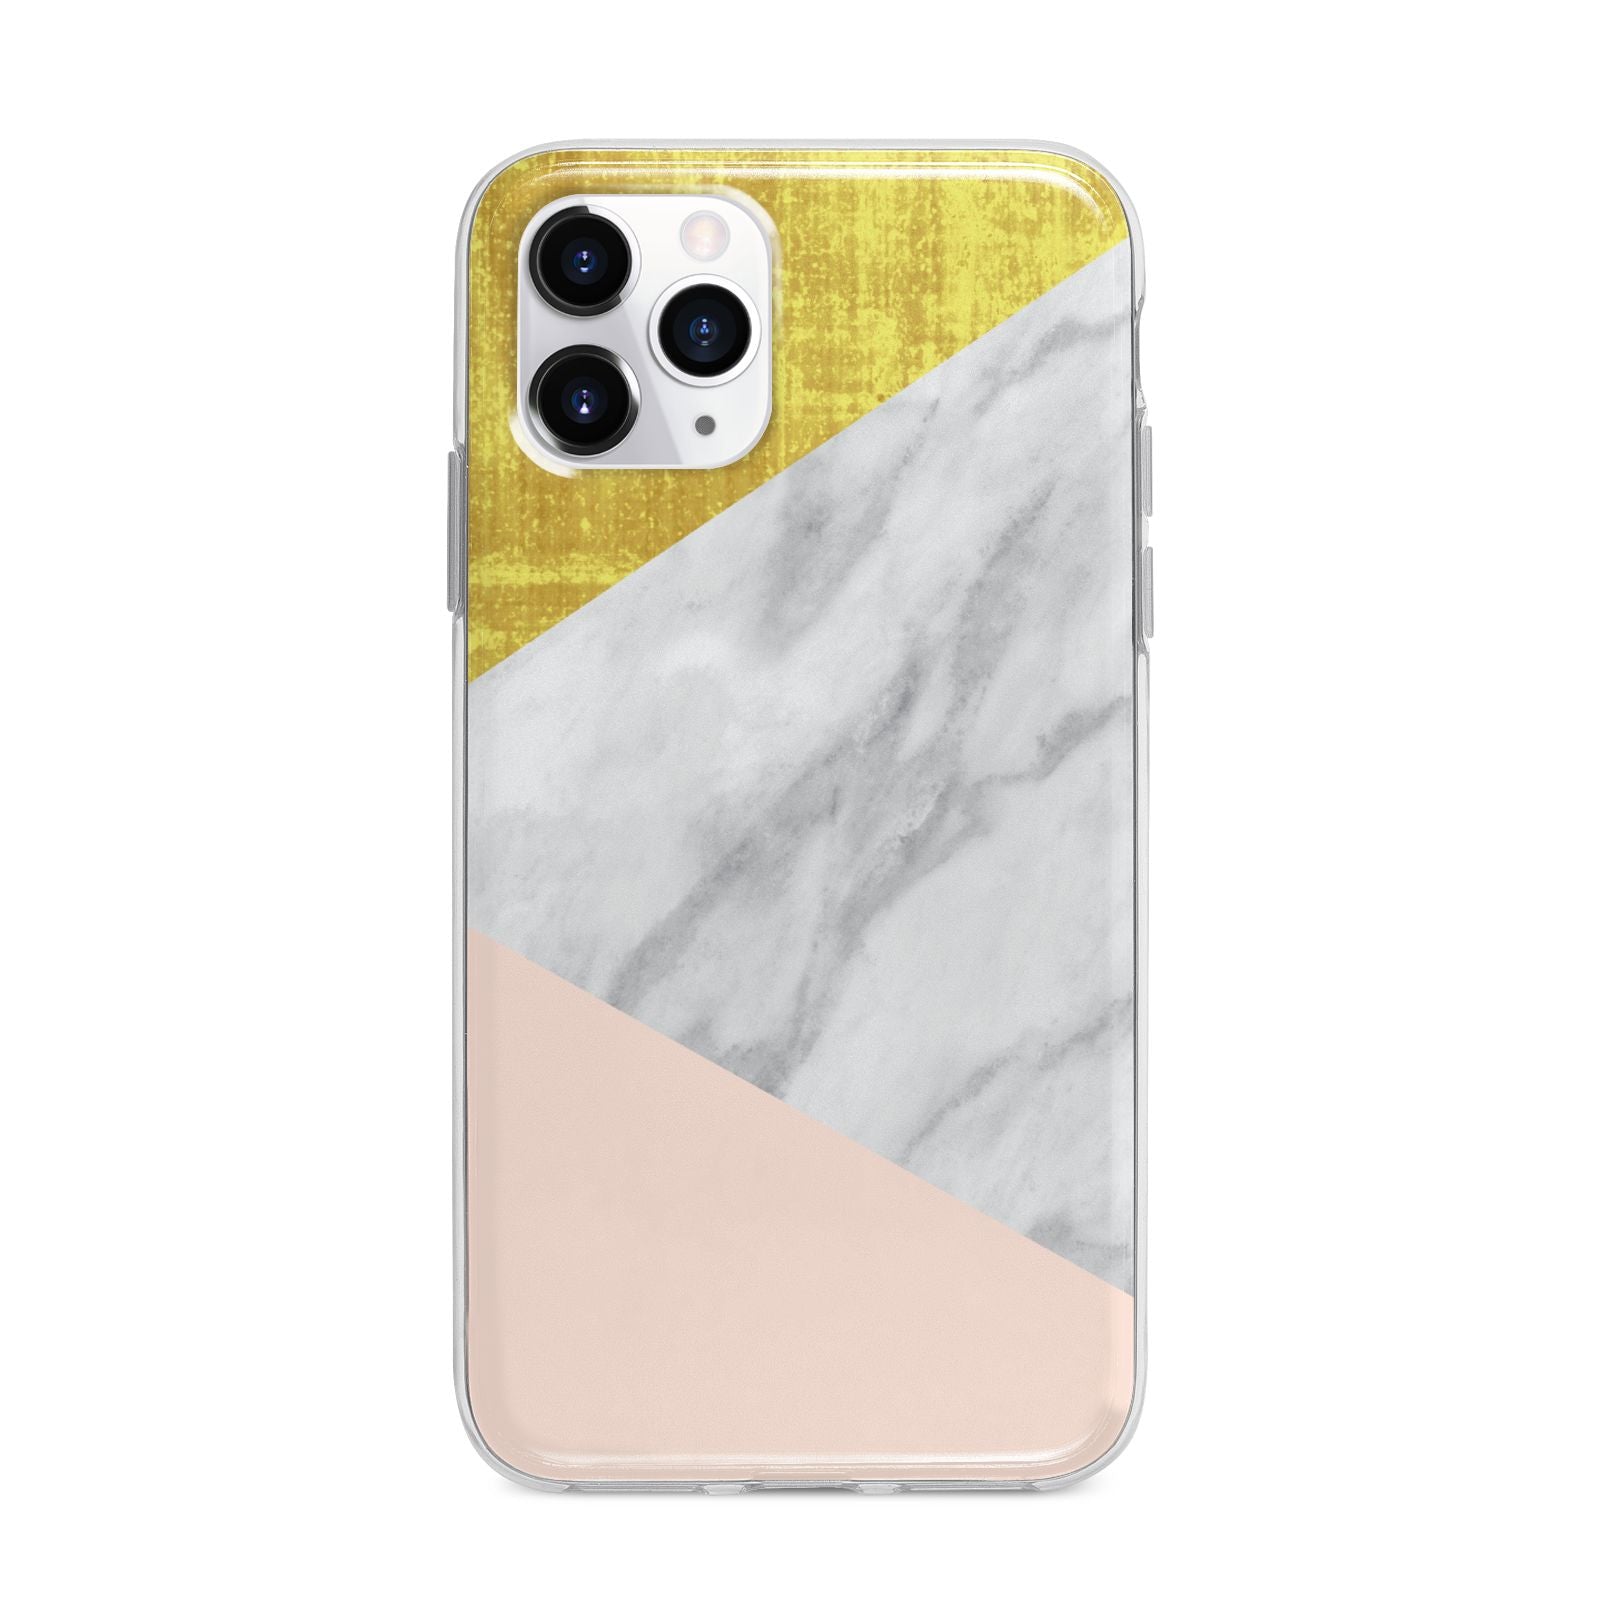 Marble White Gold Foil Peach Apple iPhone 11 Pro Max in Silver with Bumper Case